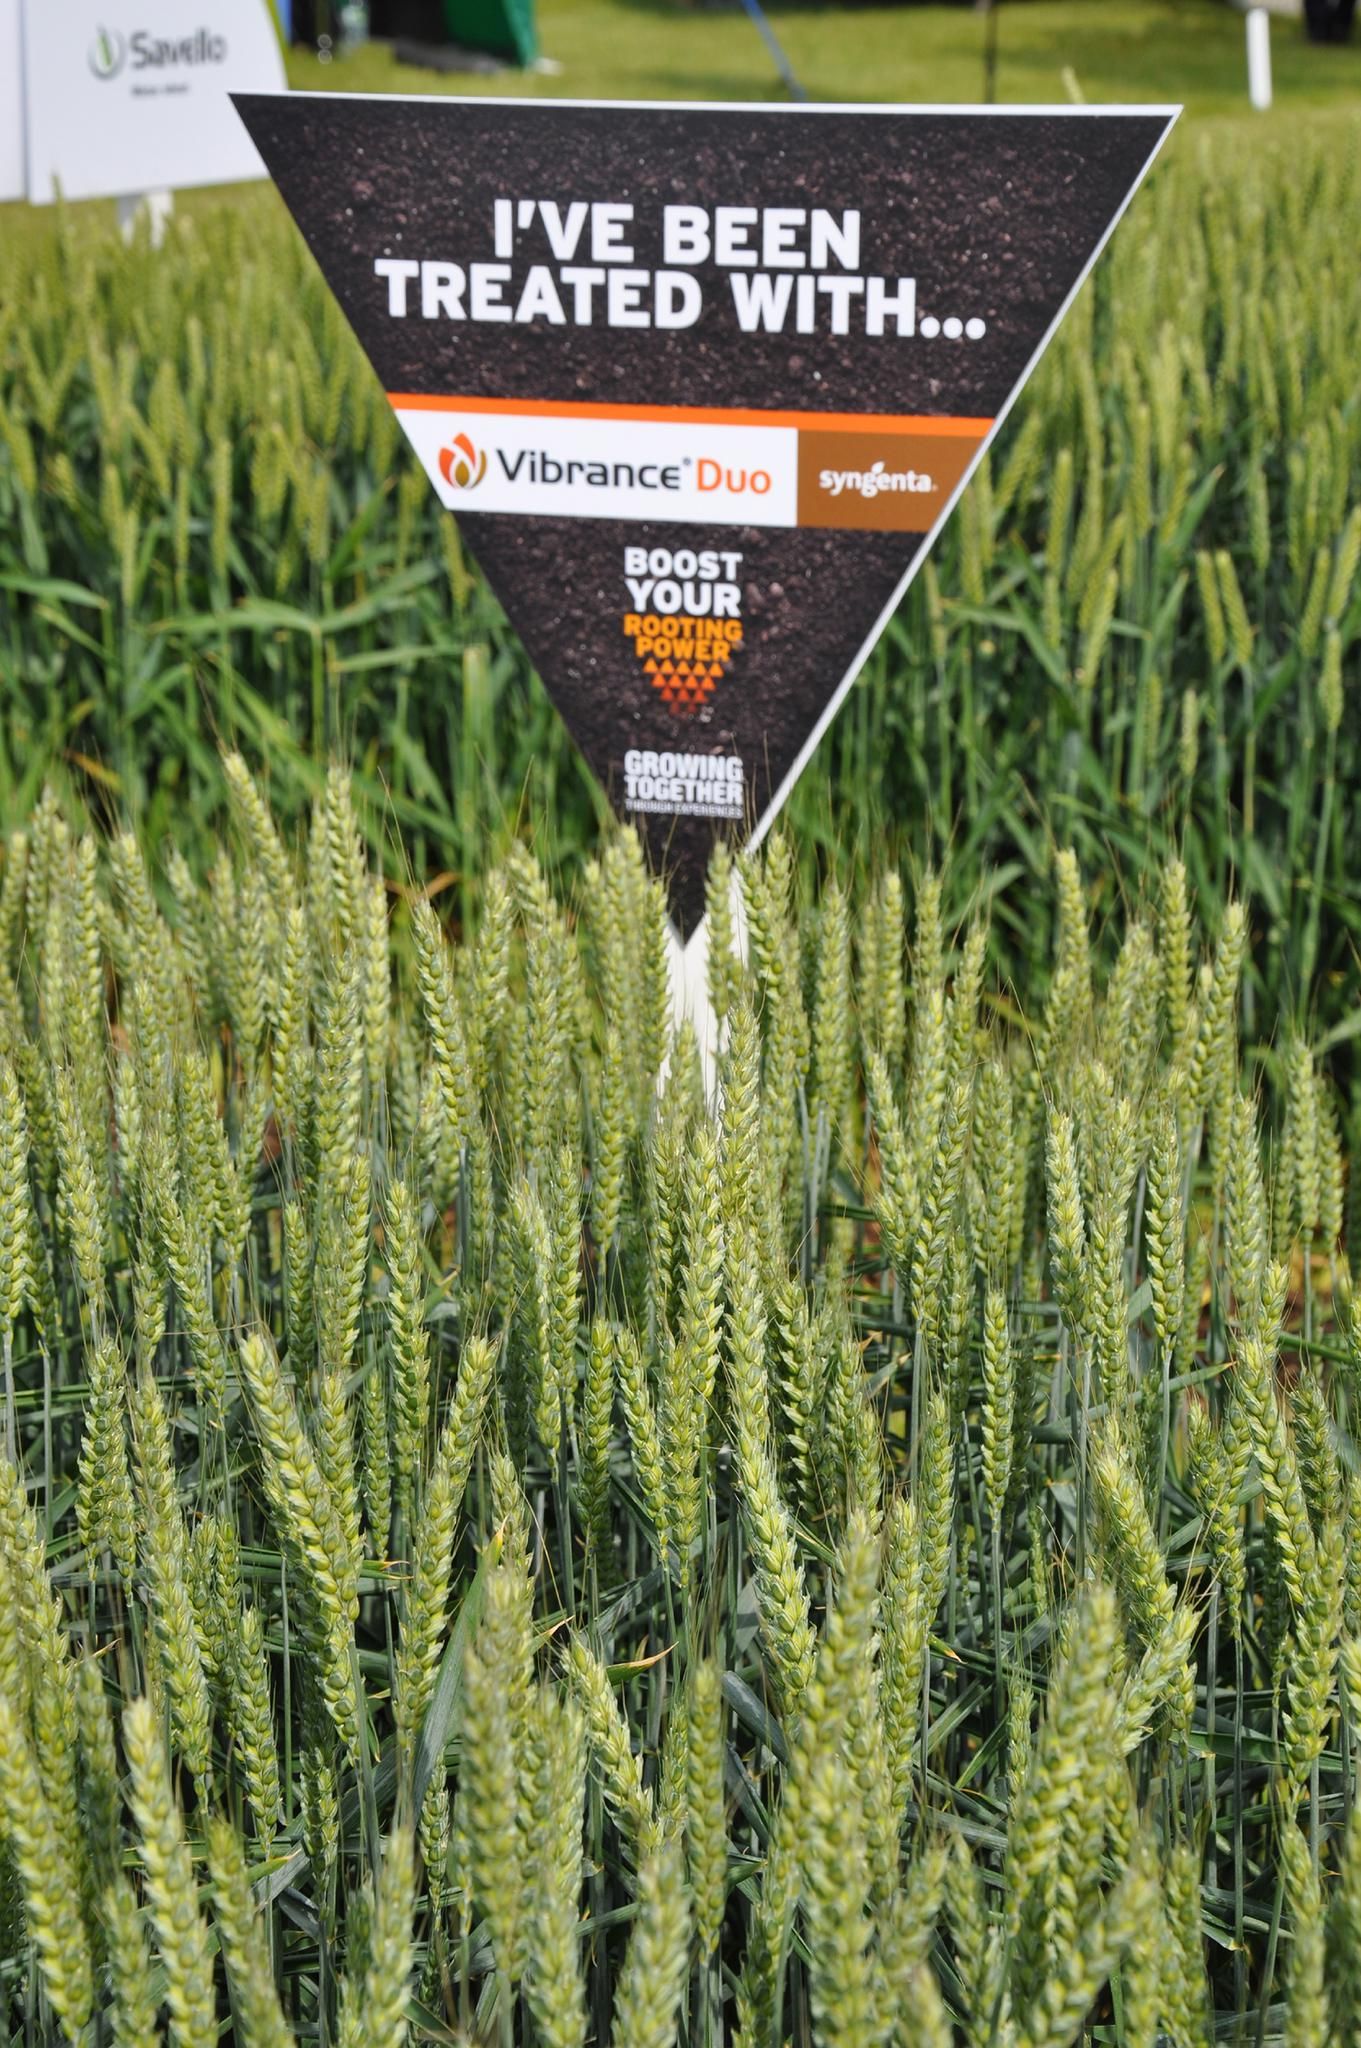 SYNGENTA TO EXPLORE ESTABLISHING CEREALS WITHOUT NEONICOTINOID SEED TREATMENT AT CEREALS 2019